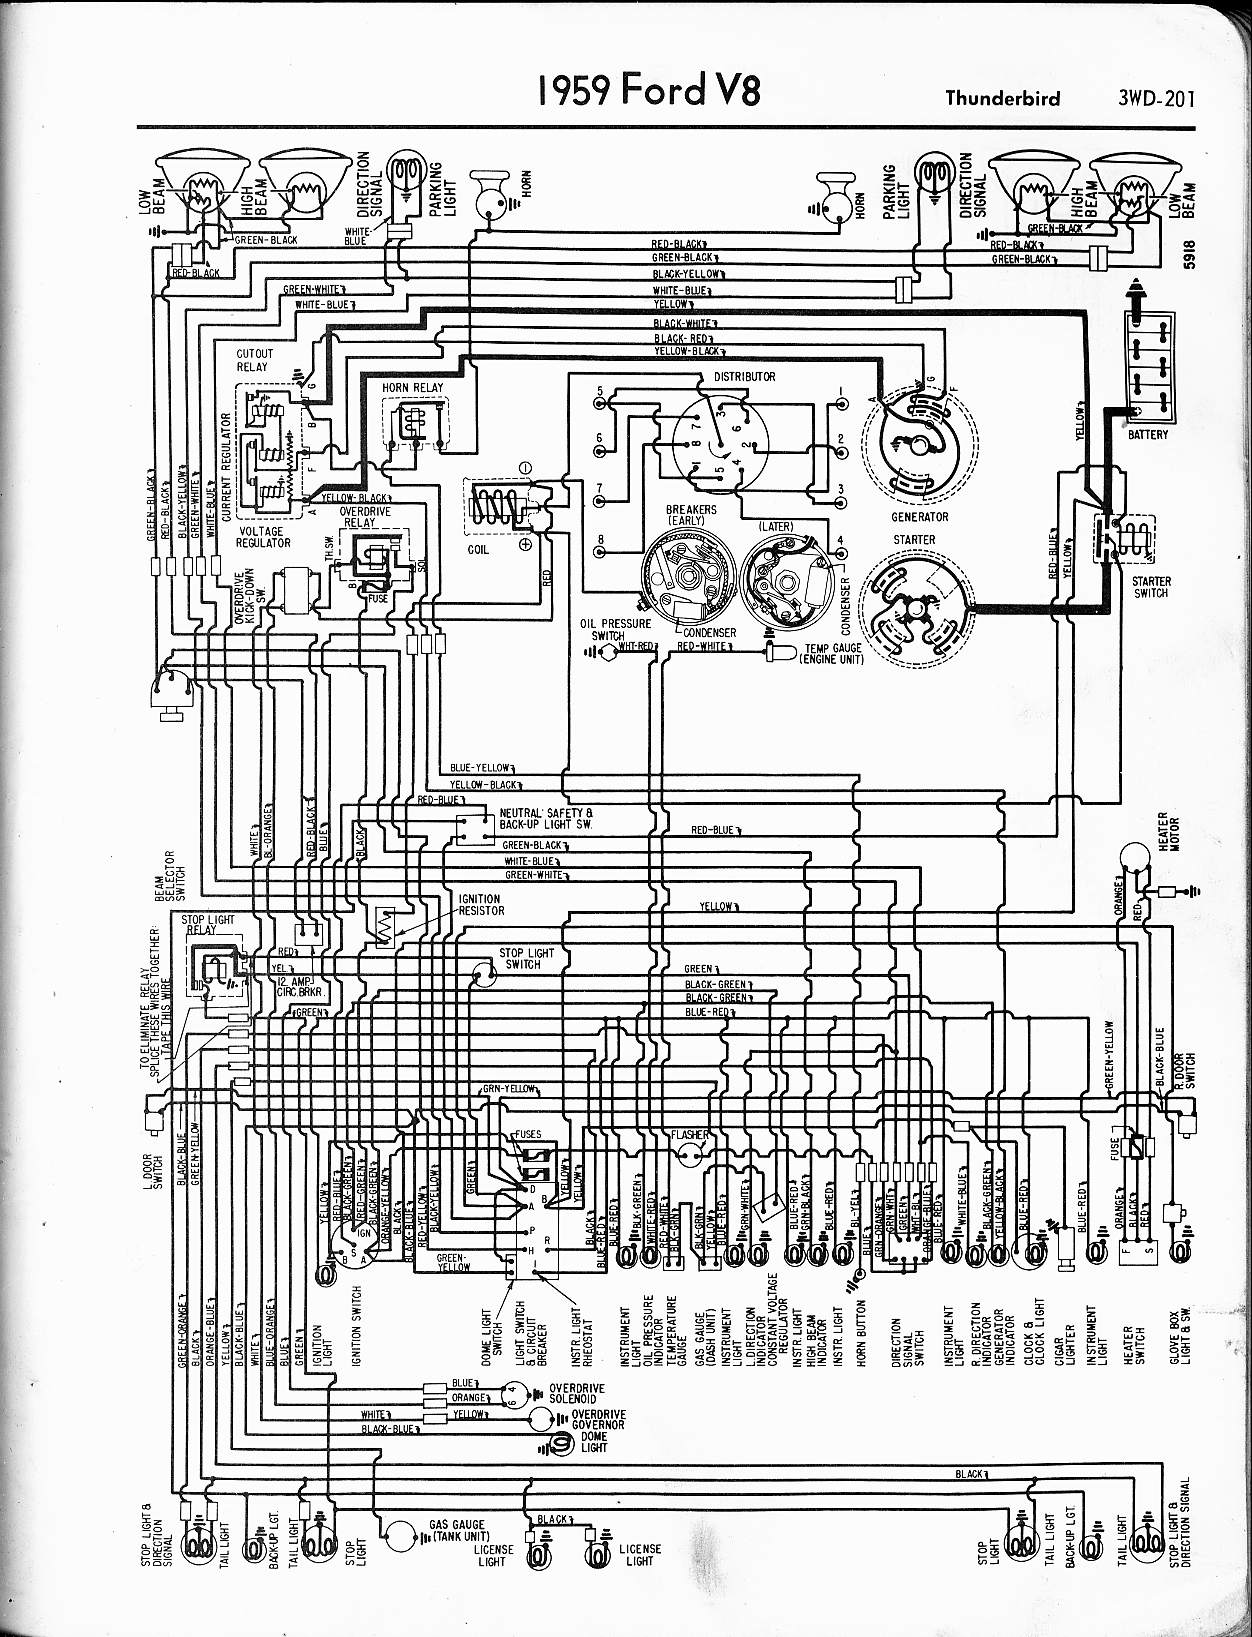 B3a4 Wiring Diagram 1959 Ford 500 Wiring Library